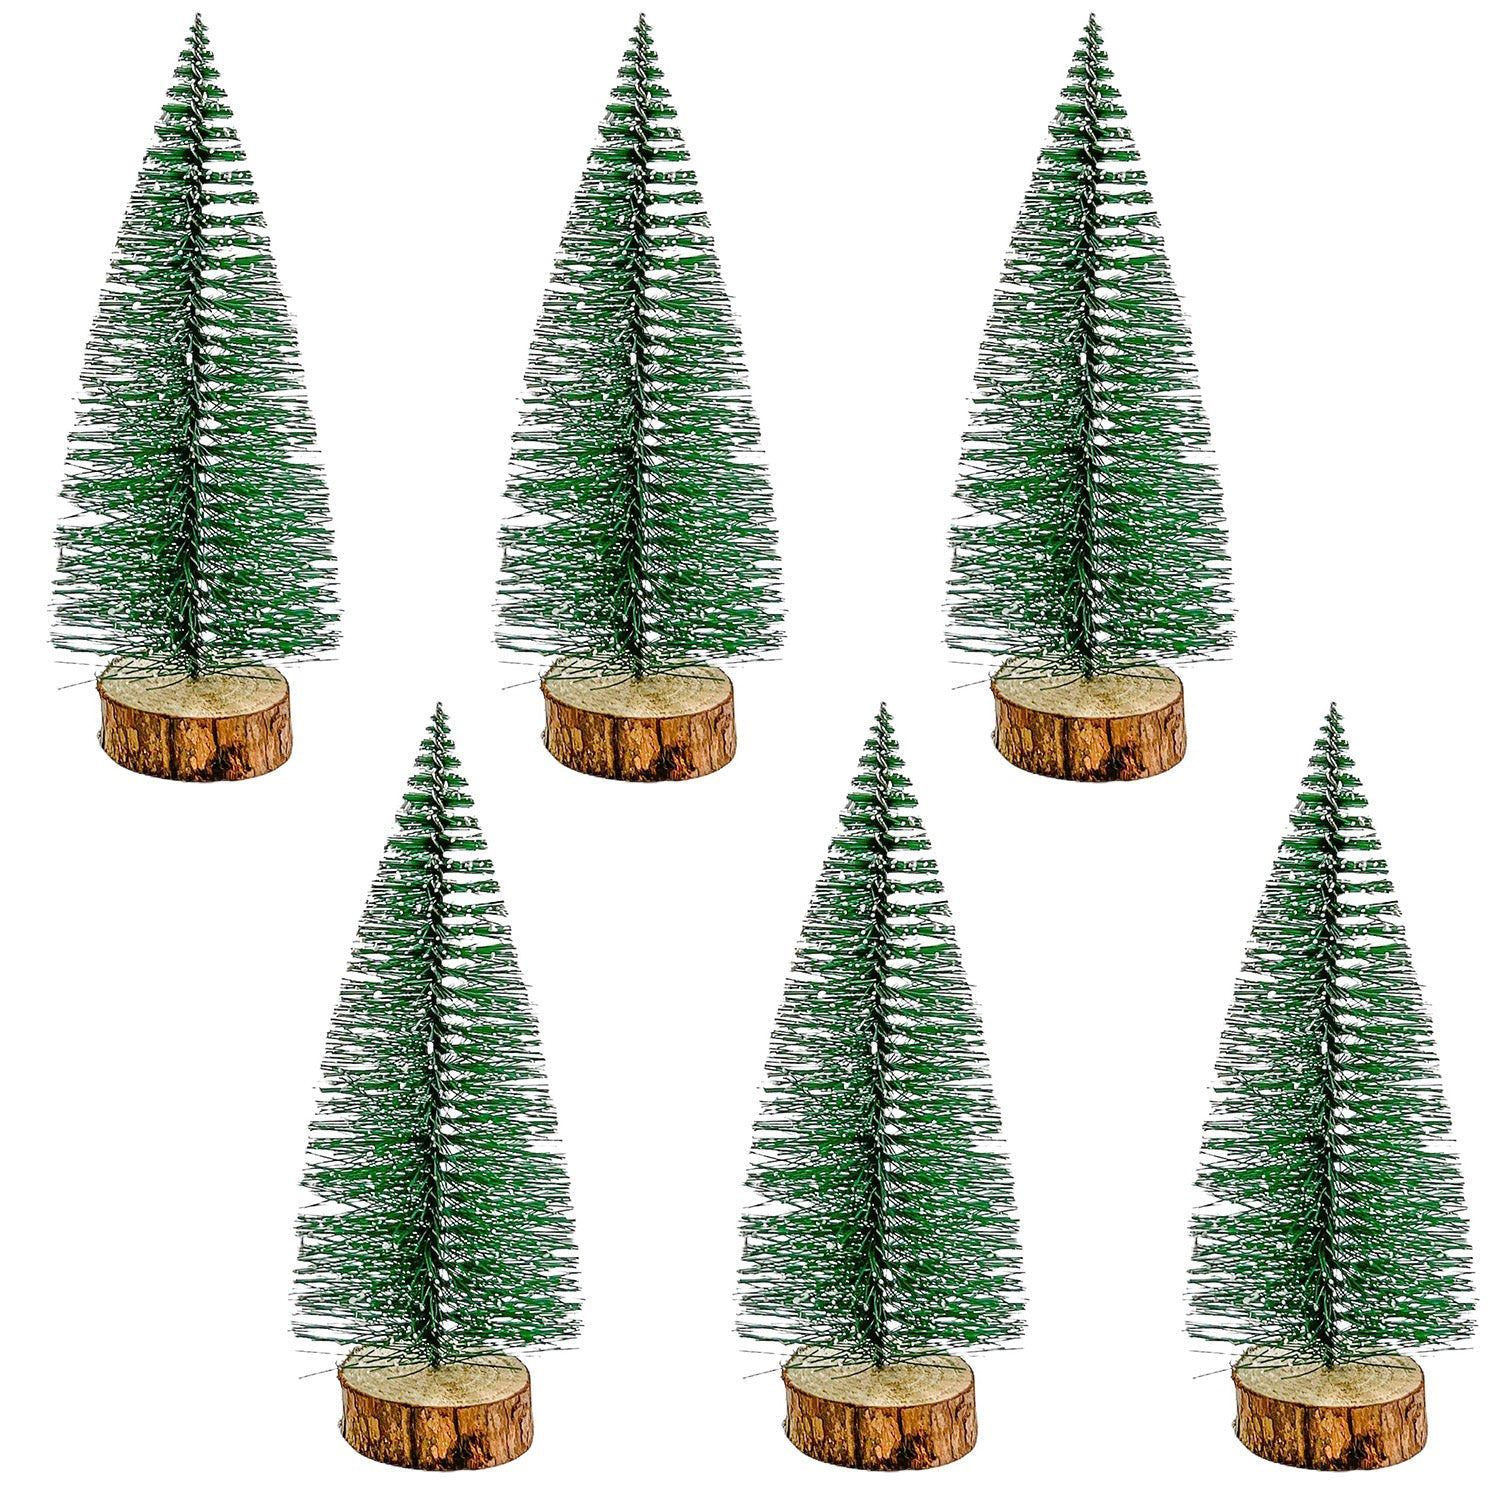 6" Snow-Tipped Holiday Christmas Tree Cake Toppers